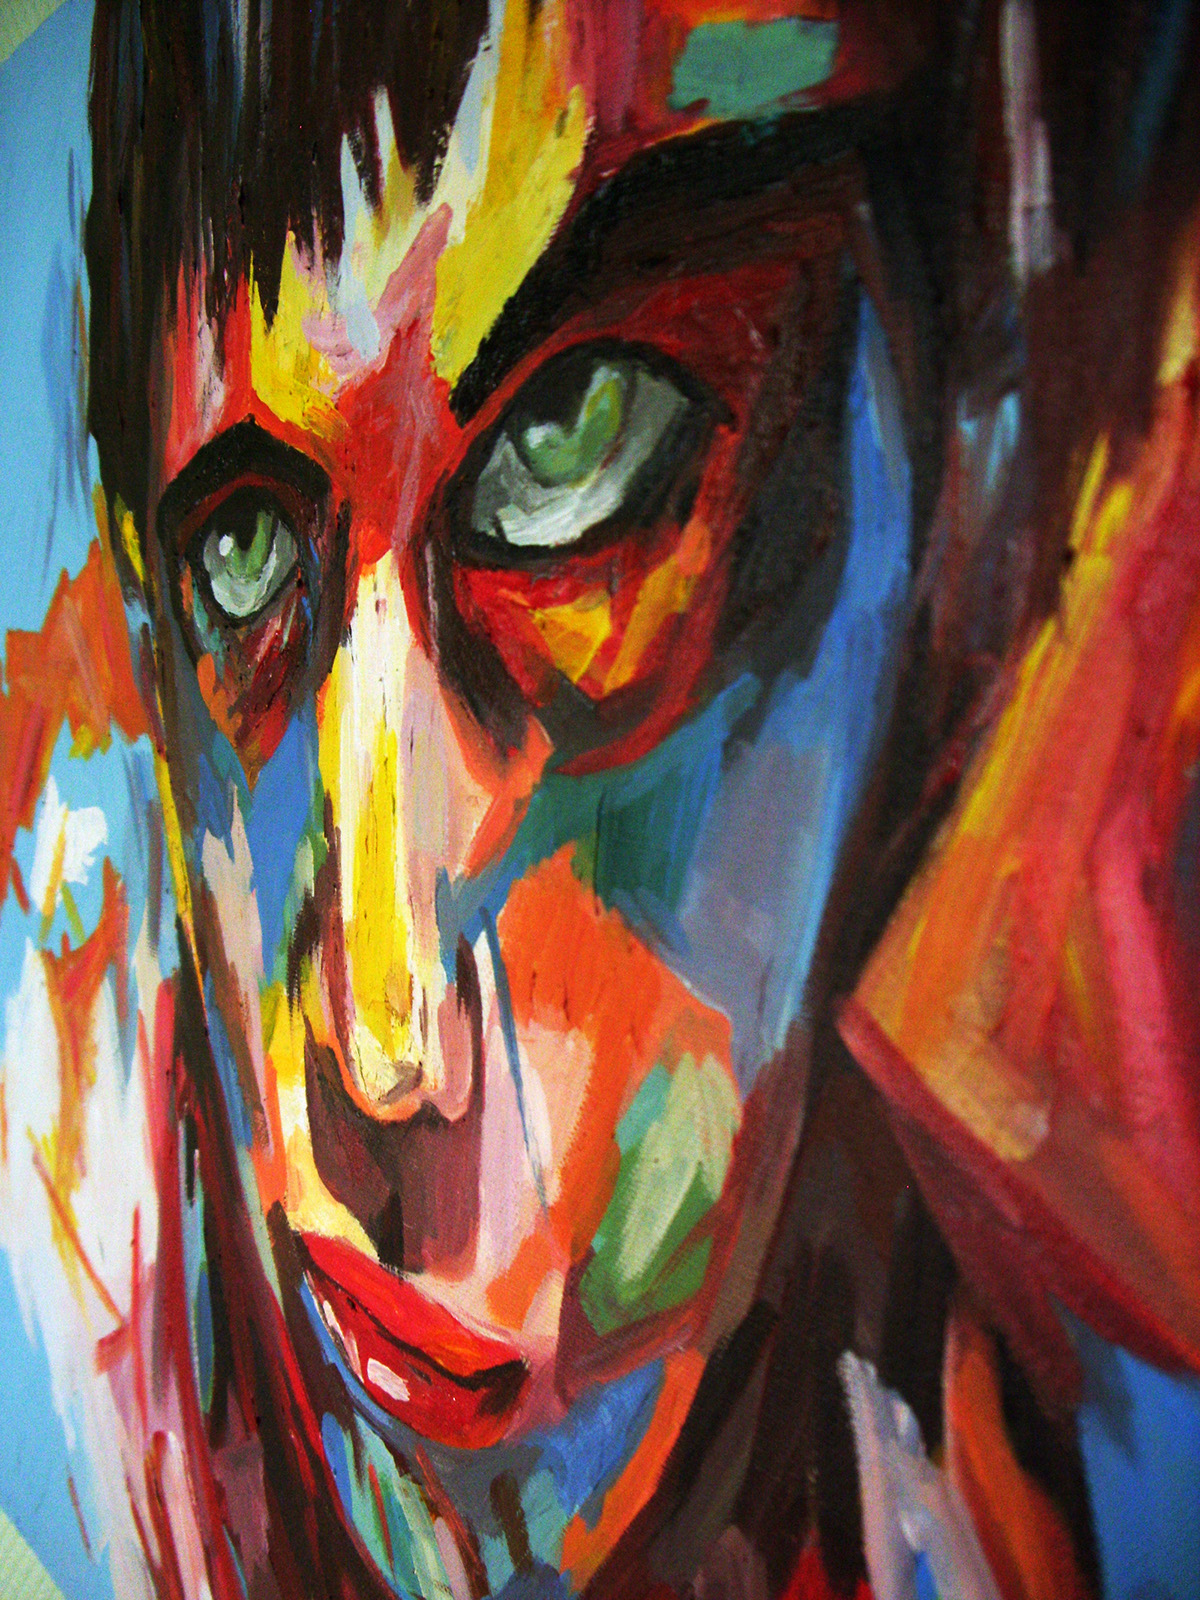 colour Portraiture canvas fine art acrylic emulsion bright Colourful  pallet knife visual presentation artist designer Illustrative merchandising fashion apparel apparel textile management technical abilities Display display props 3D 3D collateral 2D print manufacturing Embroidery stitching sewing paper construction posters adventure art Retail interiors character development characters cartoon editorial fantasy hip hop hip-hop Custom design grunge concert band mixed media silkscreen dimensional prop fabrication Illustrator vector photoshop decorate craft Artistry glyphs iconoclastic symbol monster skull devil demon xgames deviant famous comic tattoo rap japanese monsters robot shogun kaiju Circus punk Flames tags bomb Space  Invaders xray Tiki tiger strips lighting bolts rockets evil sketchels 80s 80's eighties tv manga Comix pixel atari tentacles stylized drip simpsonized War silo Silhouette black bat 8-bit 8 bit Eight bit splatter vampire underwater zombie blood flesh tear torn mash-up Mash up REMIX social network Island japan godzilla toys science new yorker electric tools santino rice taiwan sticker gallery Collaboration postcard Horn cyclops gold teeth smoking evil snowman giraffe fashion model Wrestler zombie wrestler king playing card eyeballs tongue dagger Sword decapitated scorpion Playground spades flys tights arrows dig-bats digbats mussels drips cloves pitch fork tail clouds storm clouds scissors Swirls clipart stocksrt stock geometric CMYK evil eye shin tanaka constructed waves flying skull cross bones Spots toy delivery van bug in teeth templates handcrafted dolls sculpture icell PP Republic kami Bushi ninjas snow beast snakes of Promotional promo bear kabuki strip klaws warrior hunted hell saved crown of thorns eagle premium denim avatars hand constructed plush exhibited monkey camouflage wallpaper messenger bag tokyo sunshine gang Entertainment sneaker pimps kicks flight adicolor customized funny bone aerosol spray mutant screen tee super species Threadless kinky semi-permanent virus beaker strain pop culture samples zero degree lab dream stars Jail house hang tag guerrilla branded Technology reality network television Show clip instant Body Parts Brains cut here chain mail chainsaw Awards online messenger horror decoder Gaming portal uncle squid game Retro vintage tour eco full throttle action sports bone crunch float bmx Bike Gear vert gravity velocity grind Hang time Ramp pounce environmental Department Design Surf Board IN skate WE TRUST or die checker stripes Pinstripes big kahuna Flowers Tropical mannequins swim china hearts Flying re-branding junior cupid crow Racing pipes building blocks metallic gold refresh gimme 24k veins felt United Nation of cupco Australia cape HAND LETTERING rainbow smasher bamboo expedition bikini chemistry trend lenticulars anime alphabet blocks Abominable snowman alchemy alley Cat Airhead Atrophy Atomically Baboon Barnacle Barbwire Barbarian Birdbrain blockhead Bloodsucker blast the Roach Bogeyman Bozo body bags buzzard Candy clown cockroach Mad Scientist cro-magnon man cream puff Crackerjack chrome dome cupcake cut throat Czar Daredevil dog diva dough boy Fairy Godmother fairytale Flyboy geek